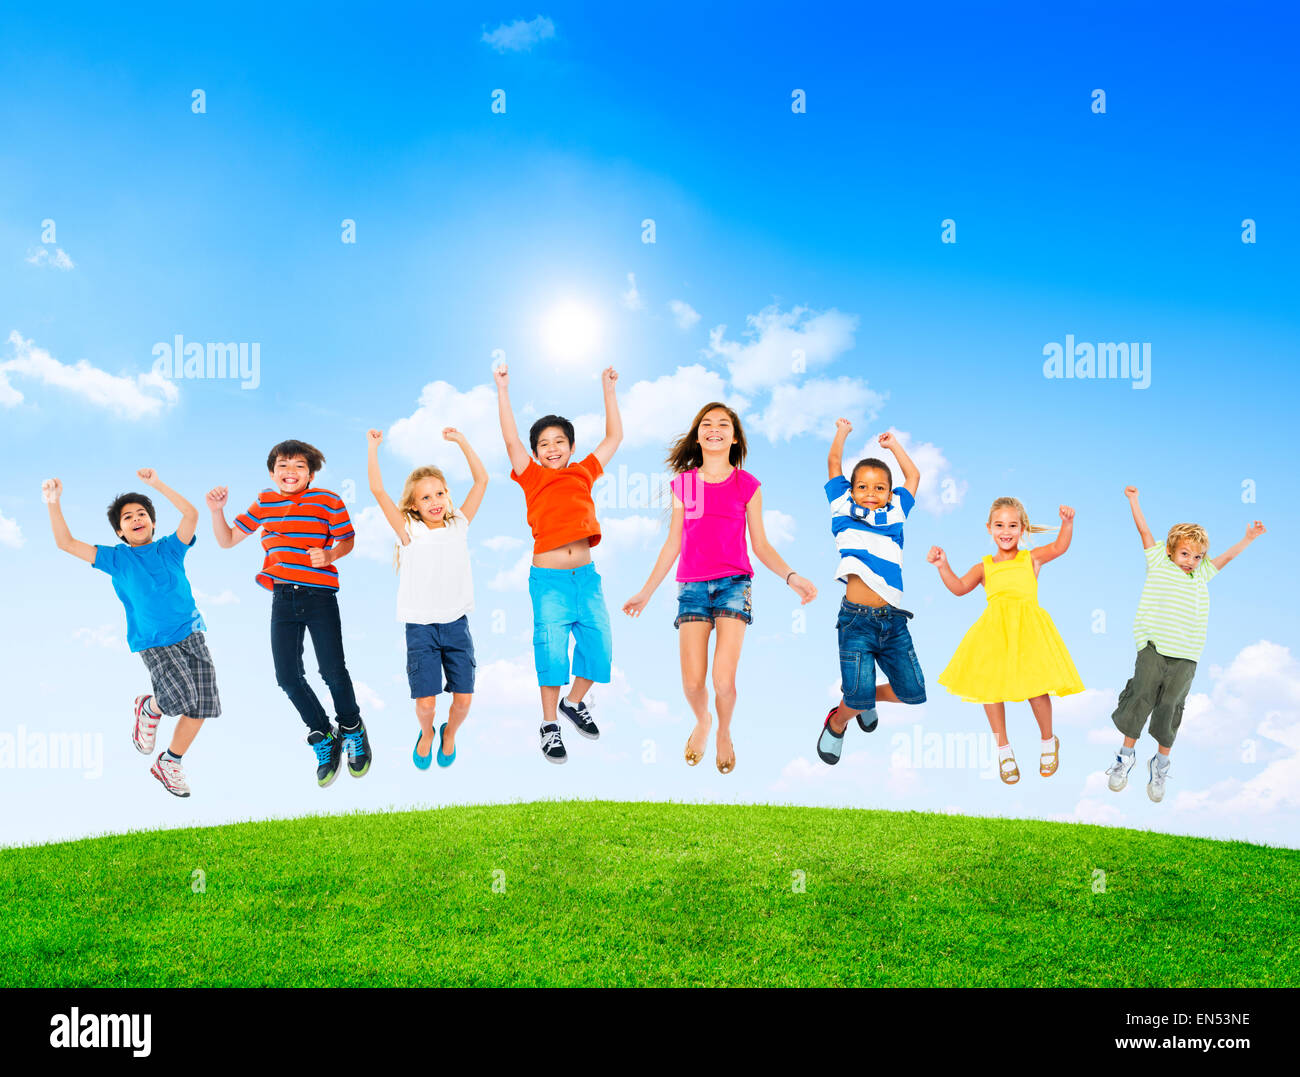 Group of Diverse Multi-Ethic Children Jumping Outdoors Stock Photo